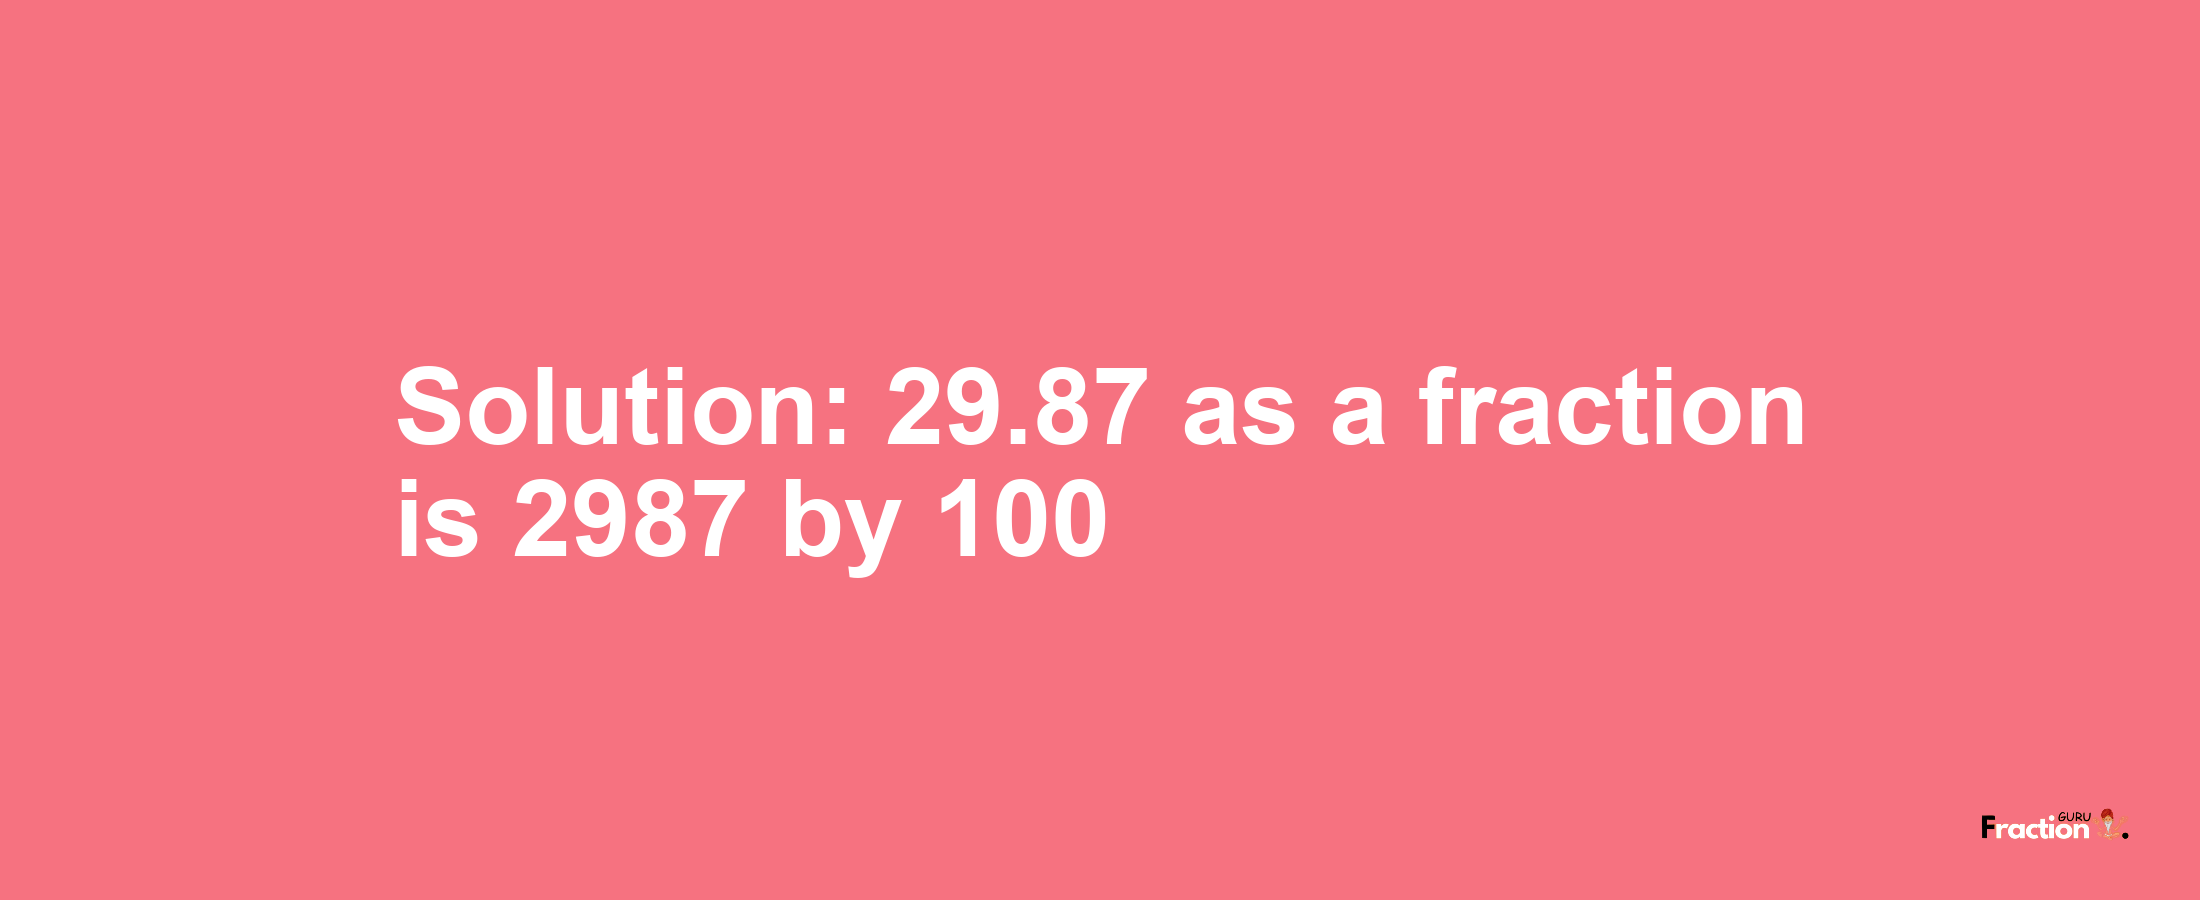 Solution:29.87 as a fraction is 2987/100